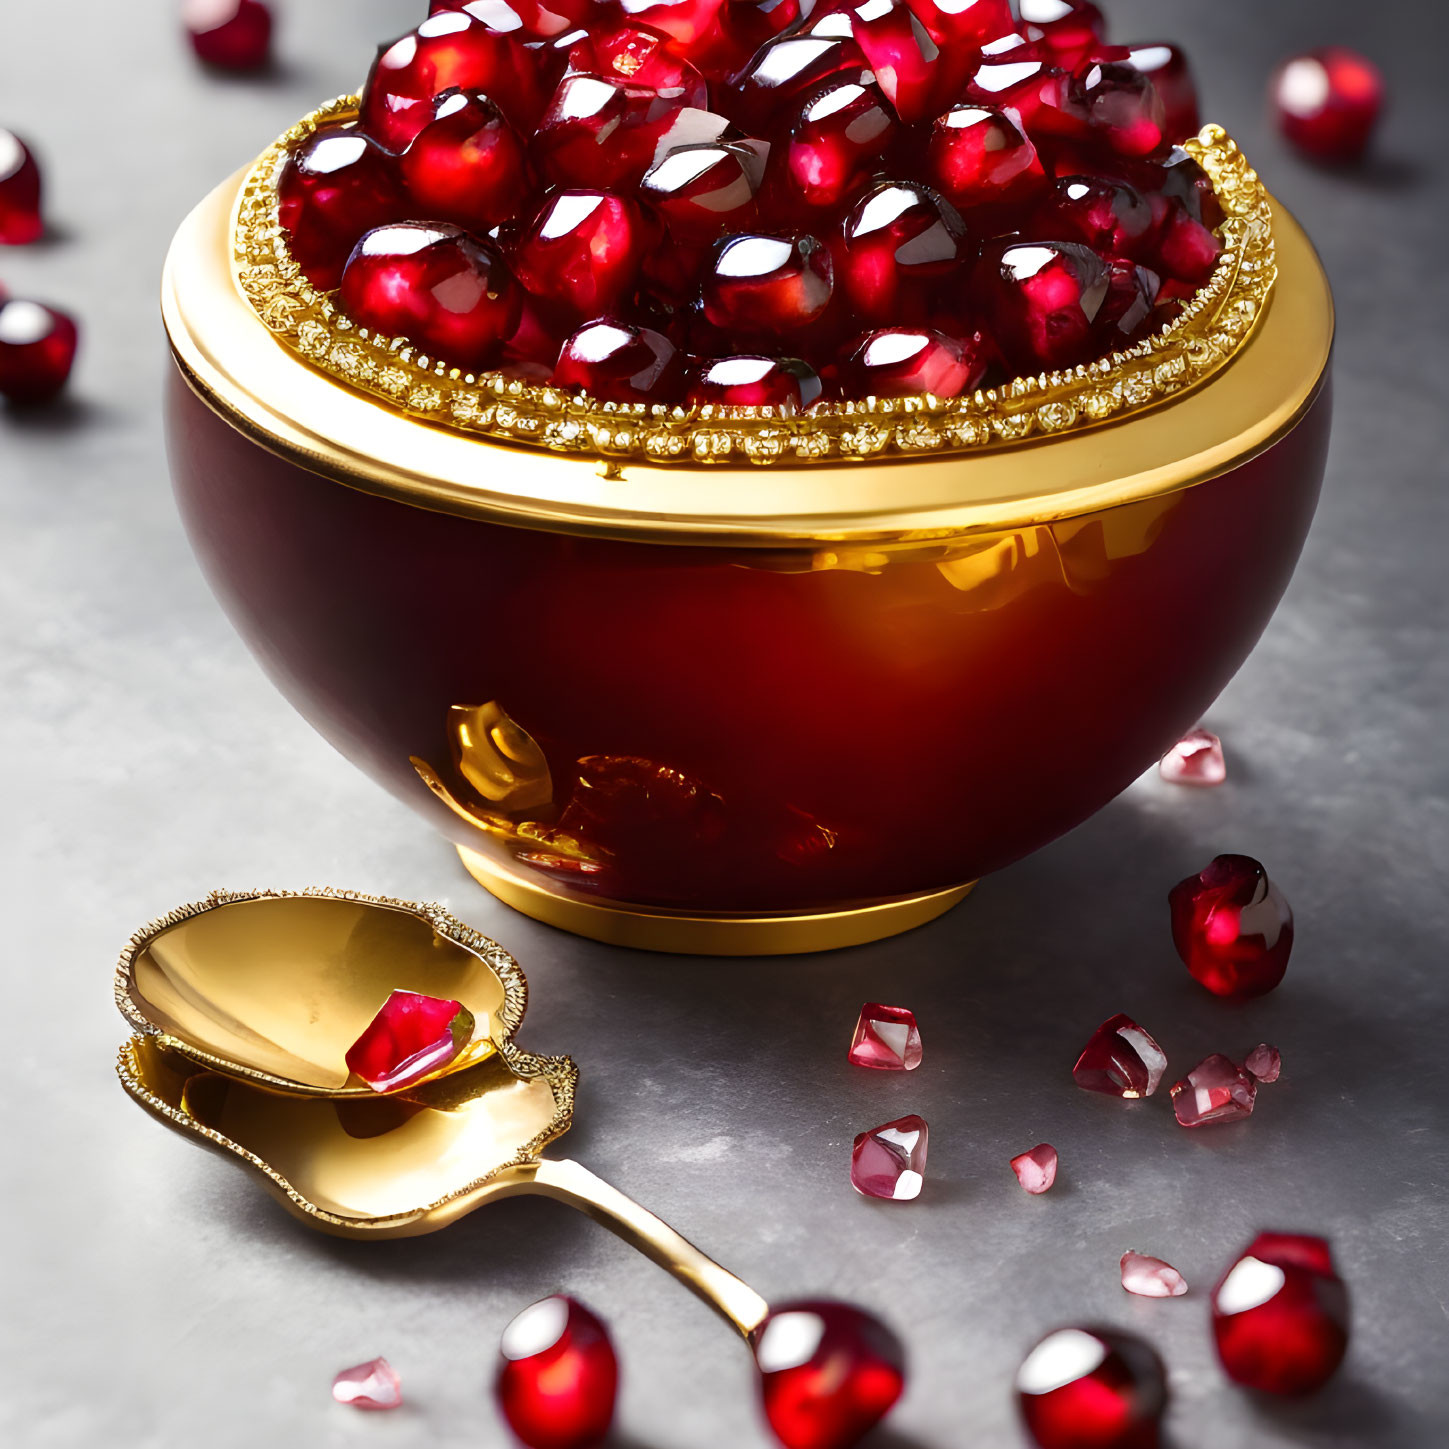 Golden Bowl with Pomegranate Seeds on Gray Surface